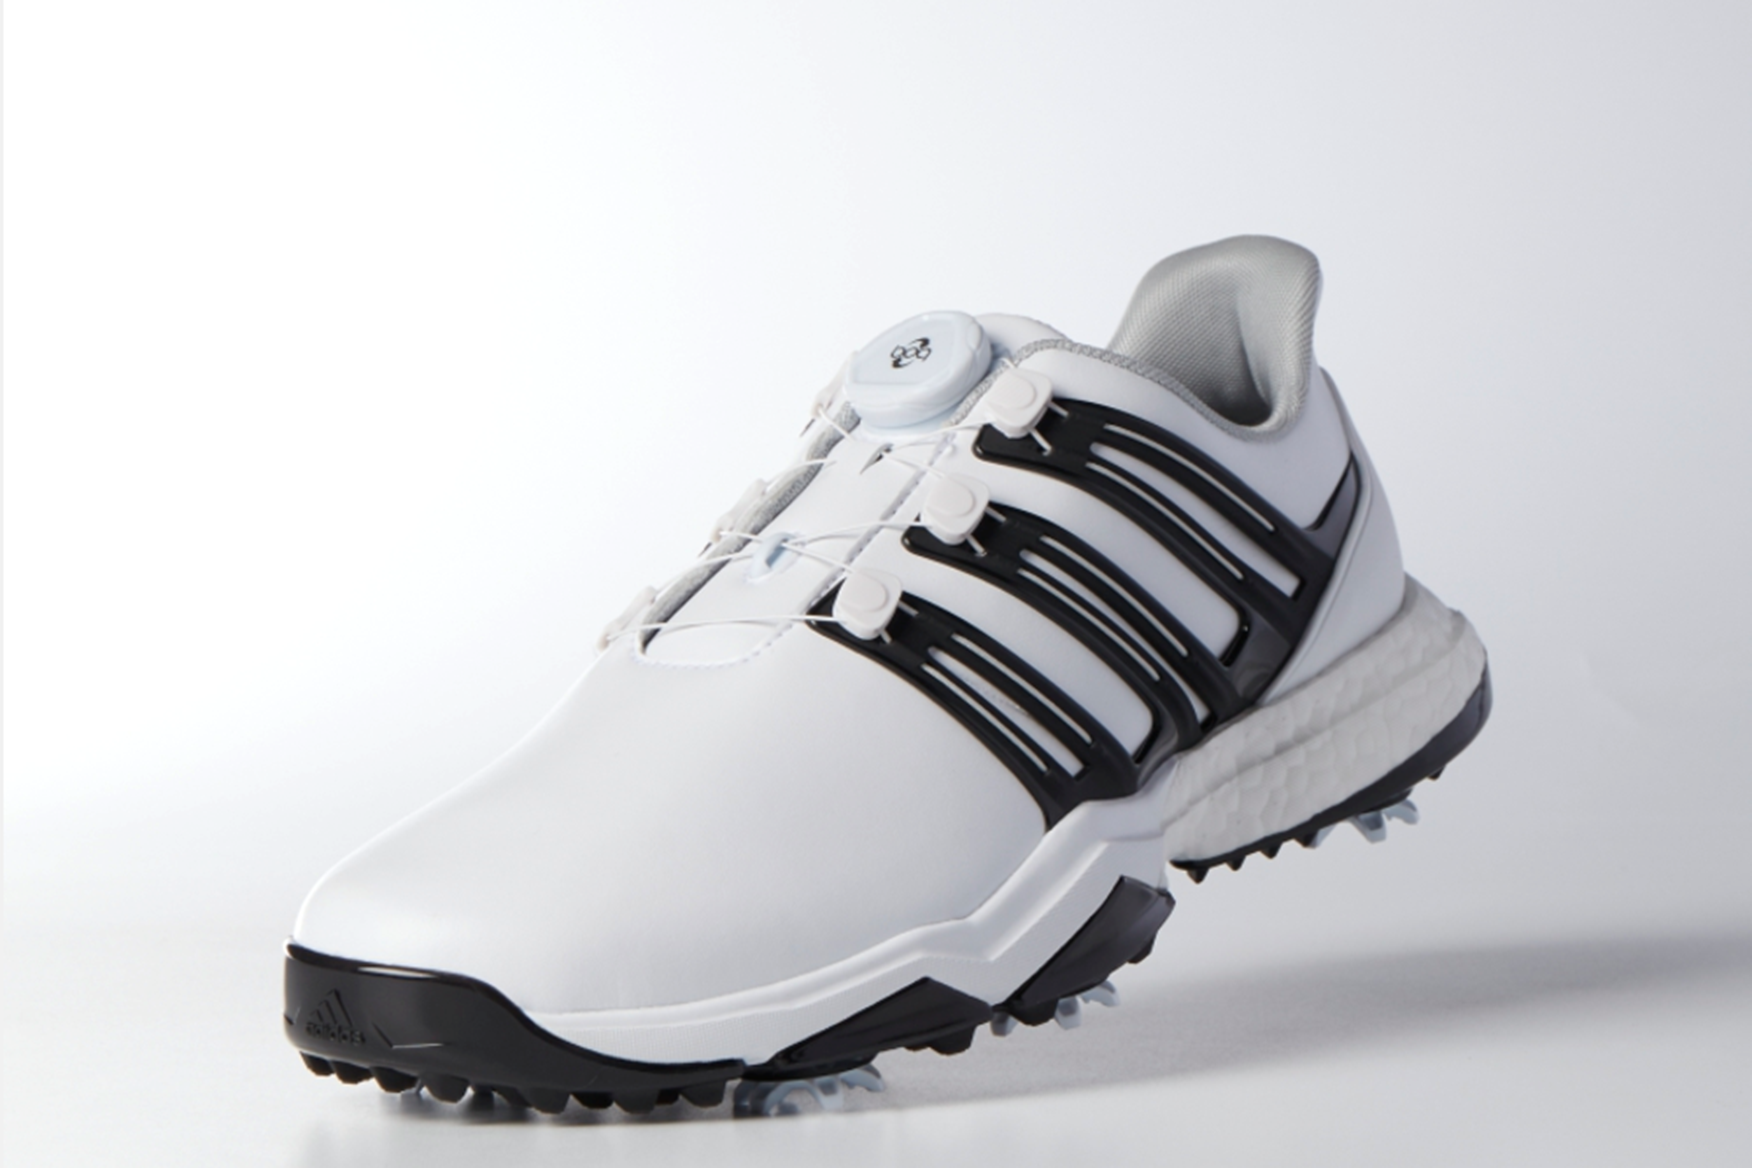 adidas powerband boa boost golf shoes review